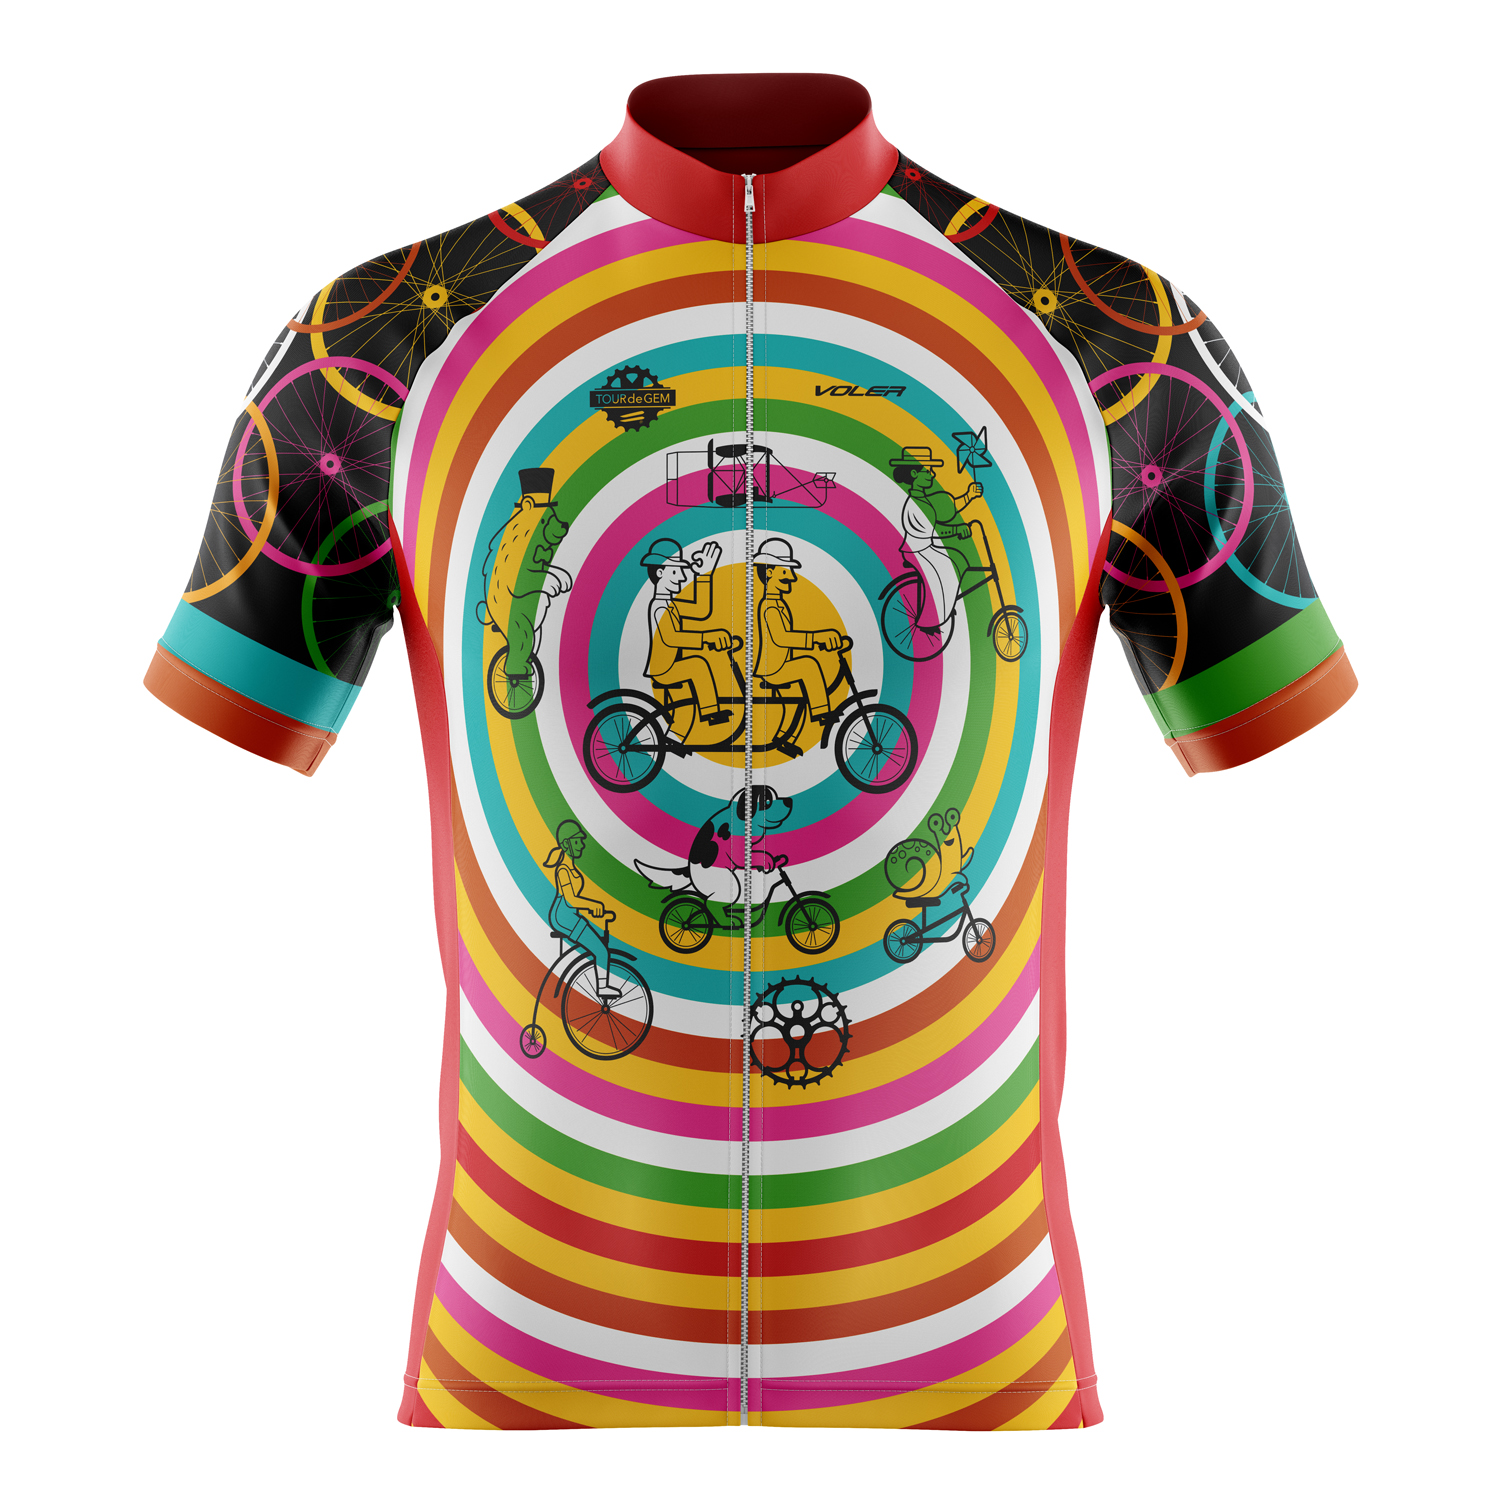 Adult 3X-Large Women's jersey